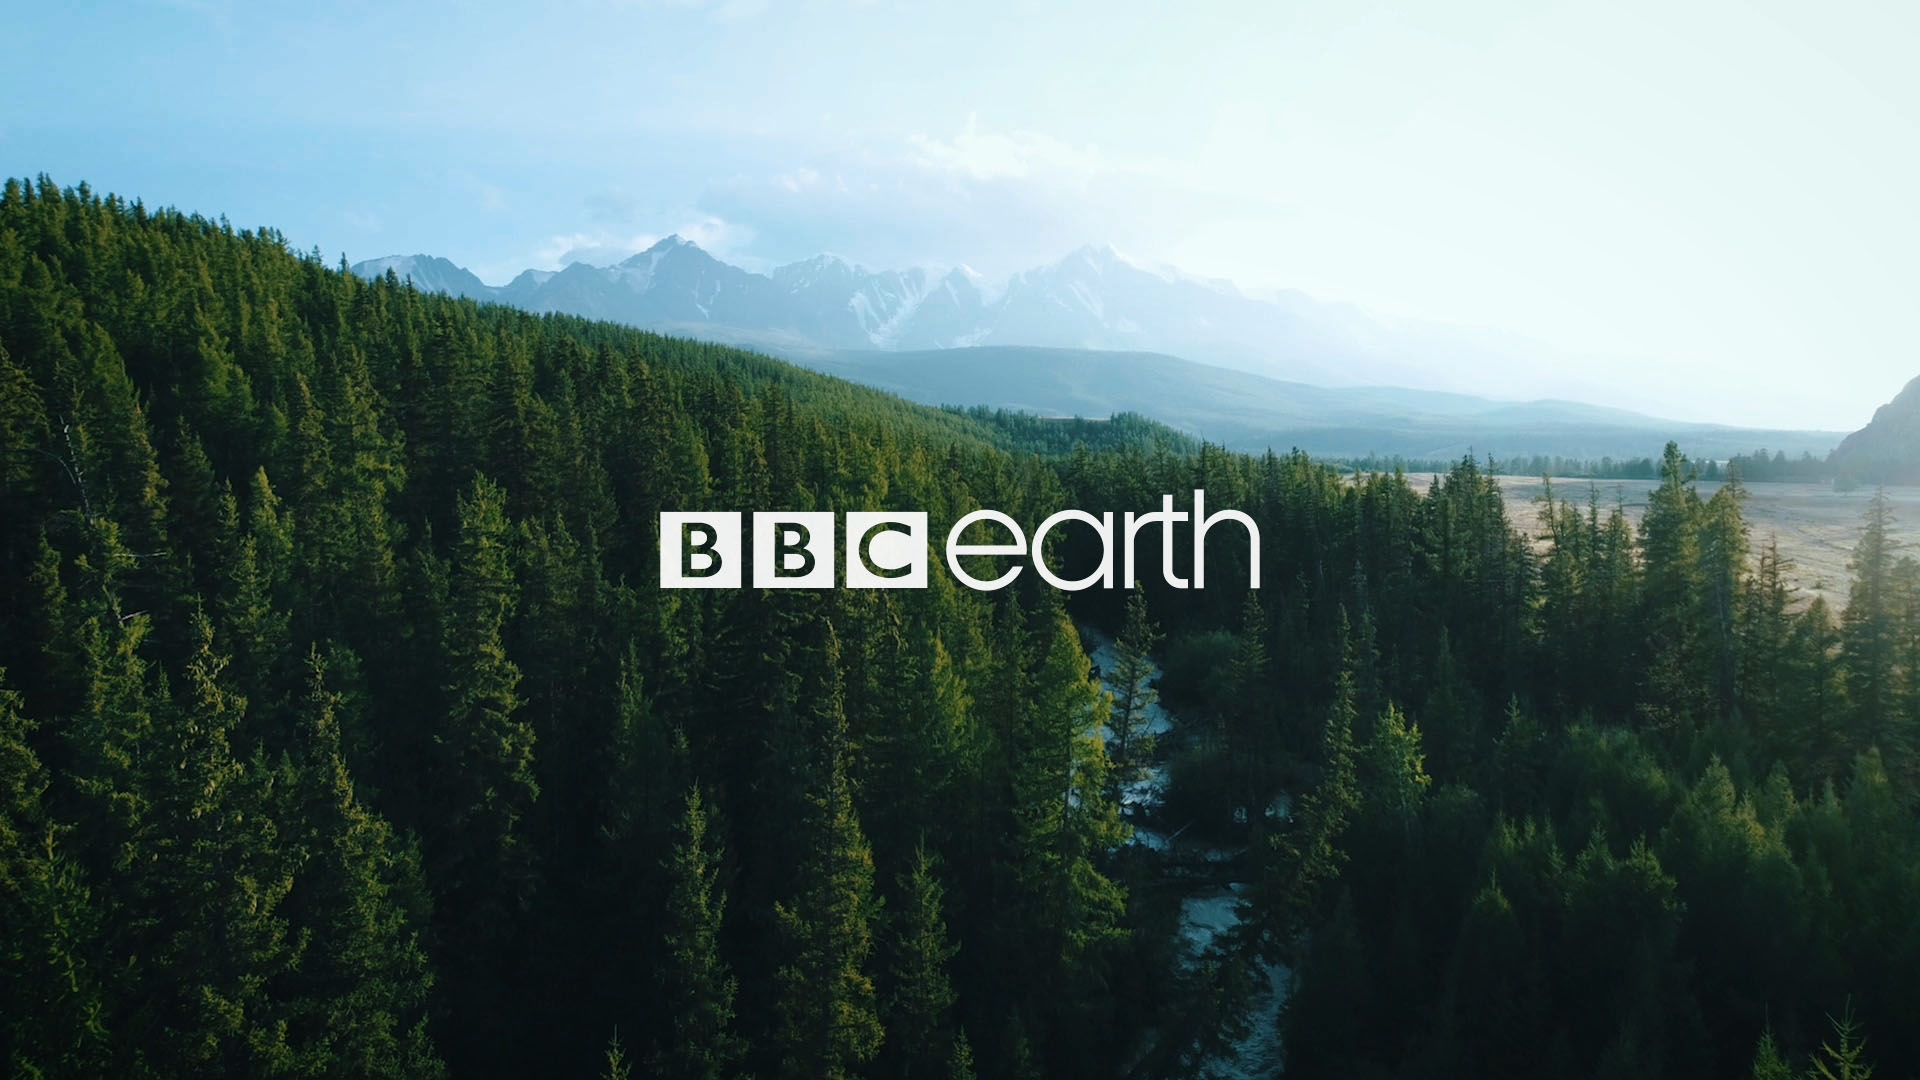 images/work/examples/bbc-earth-01.jpg